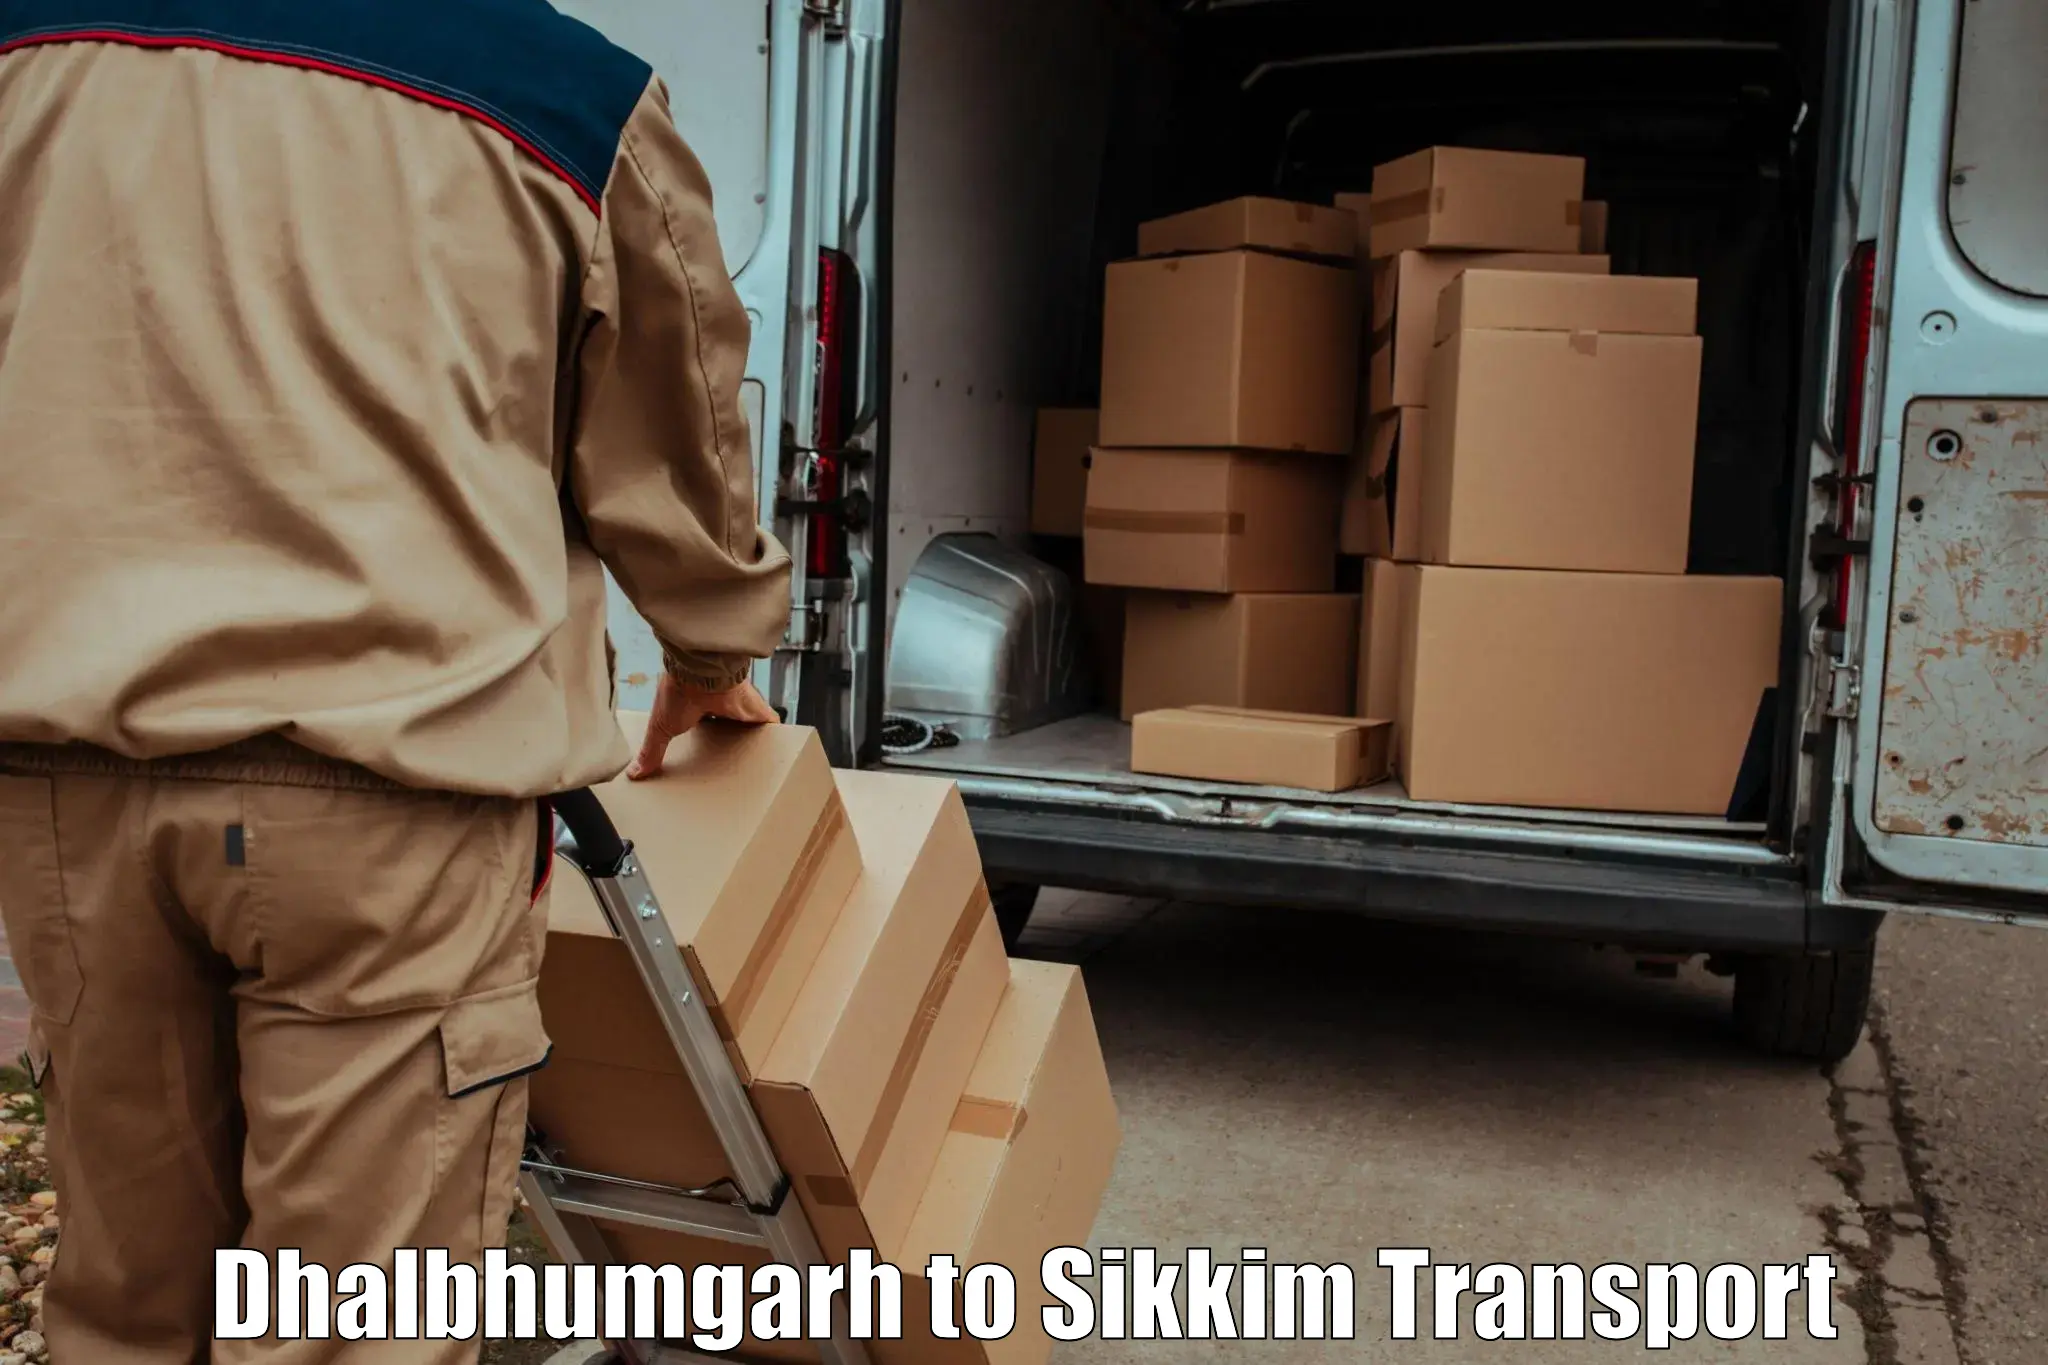 Luggage transport services Dhalbhumgarh to Pelling